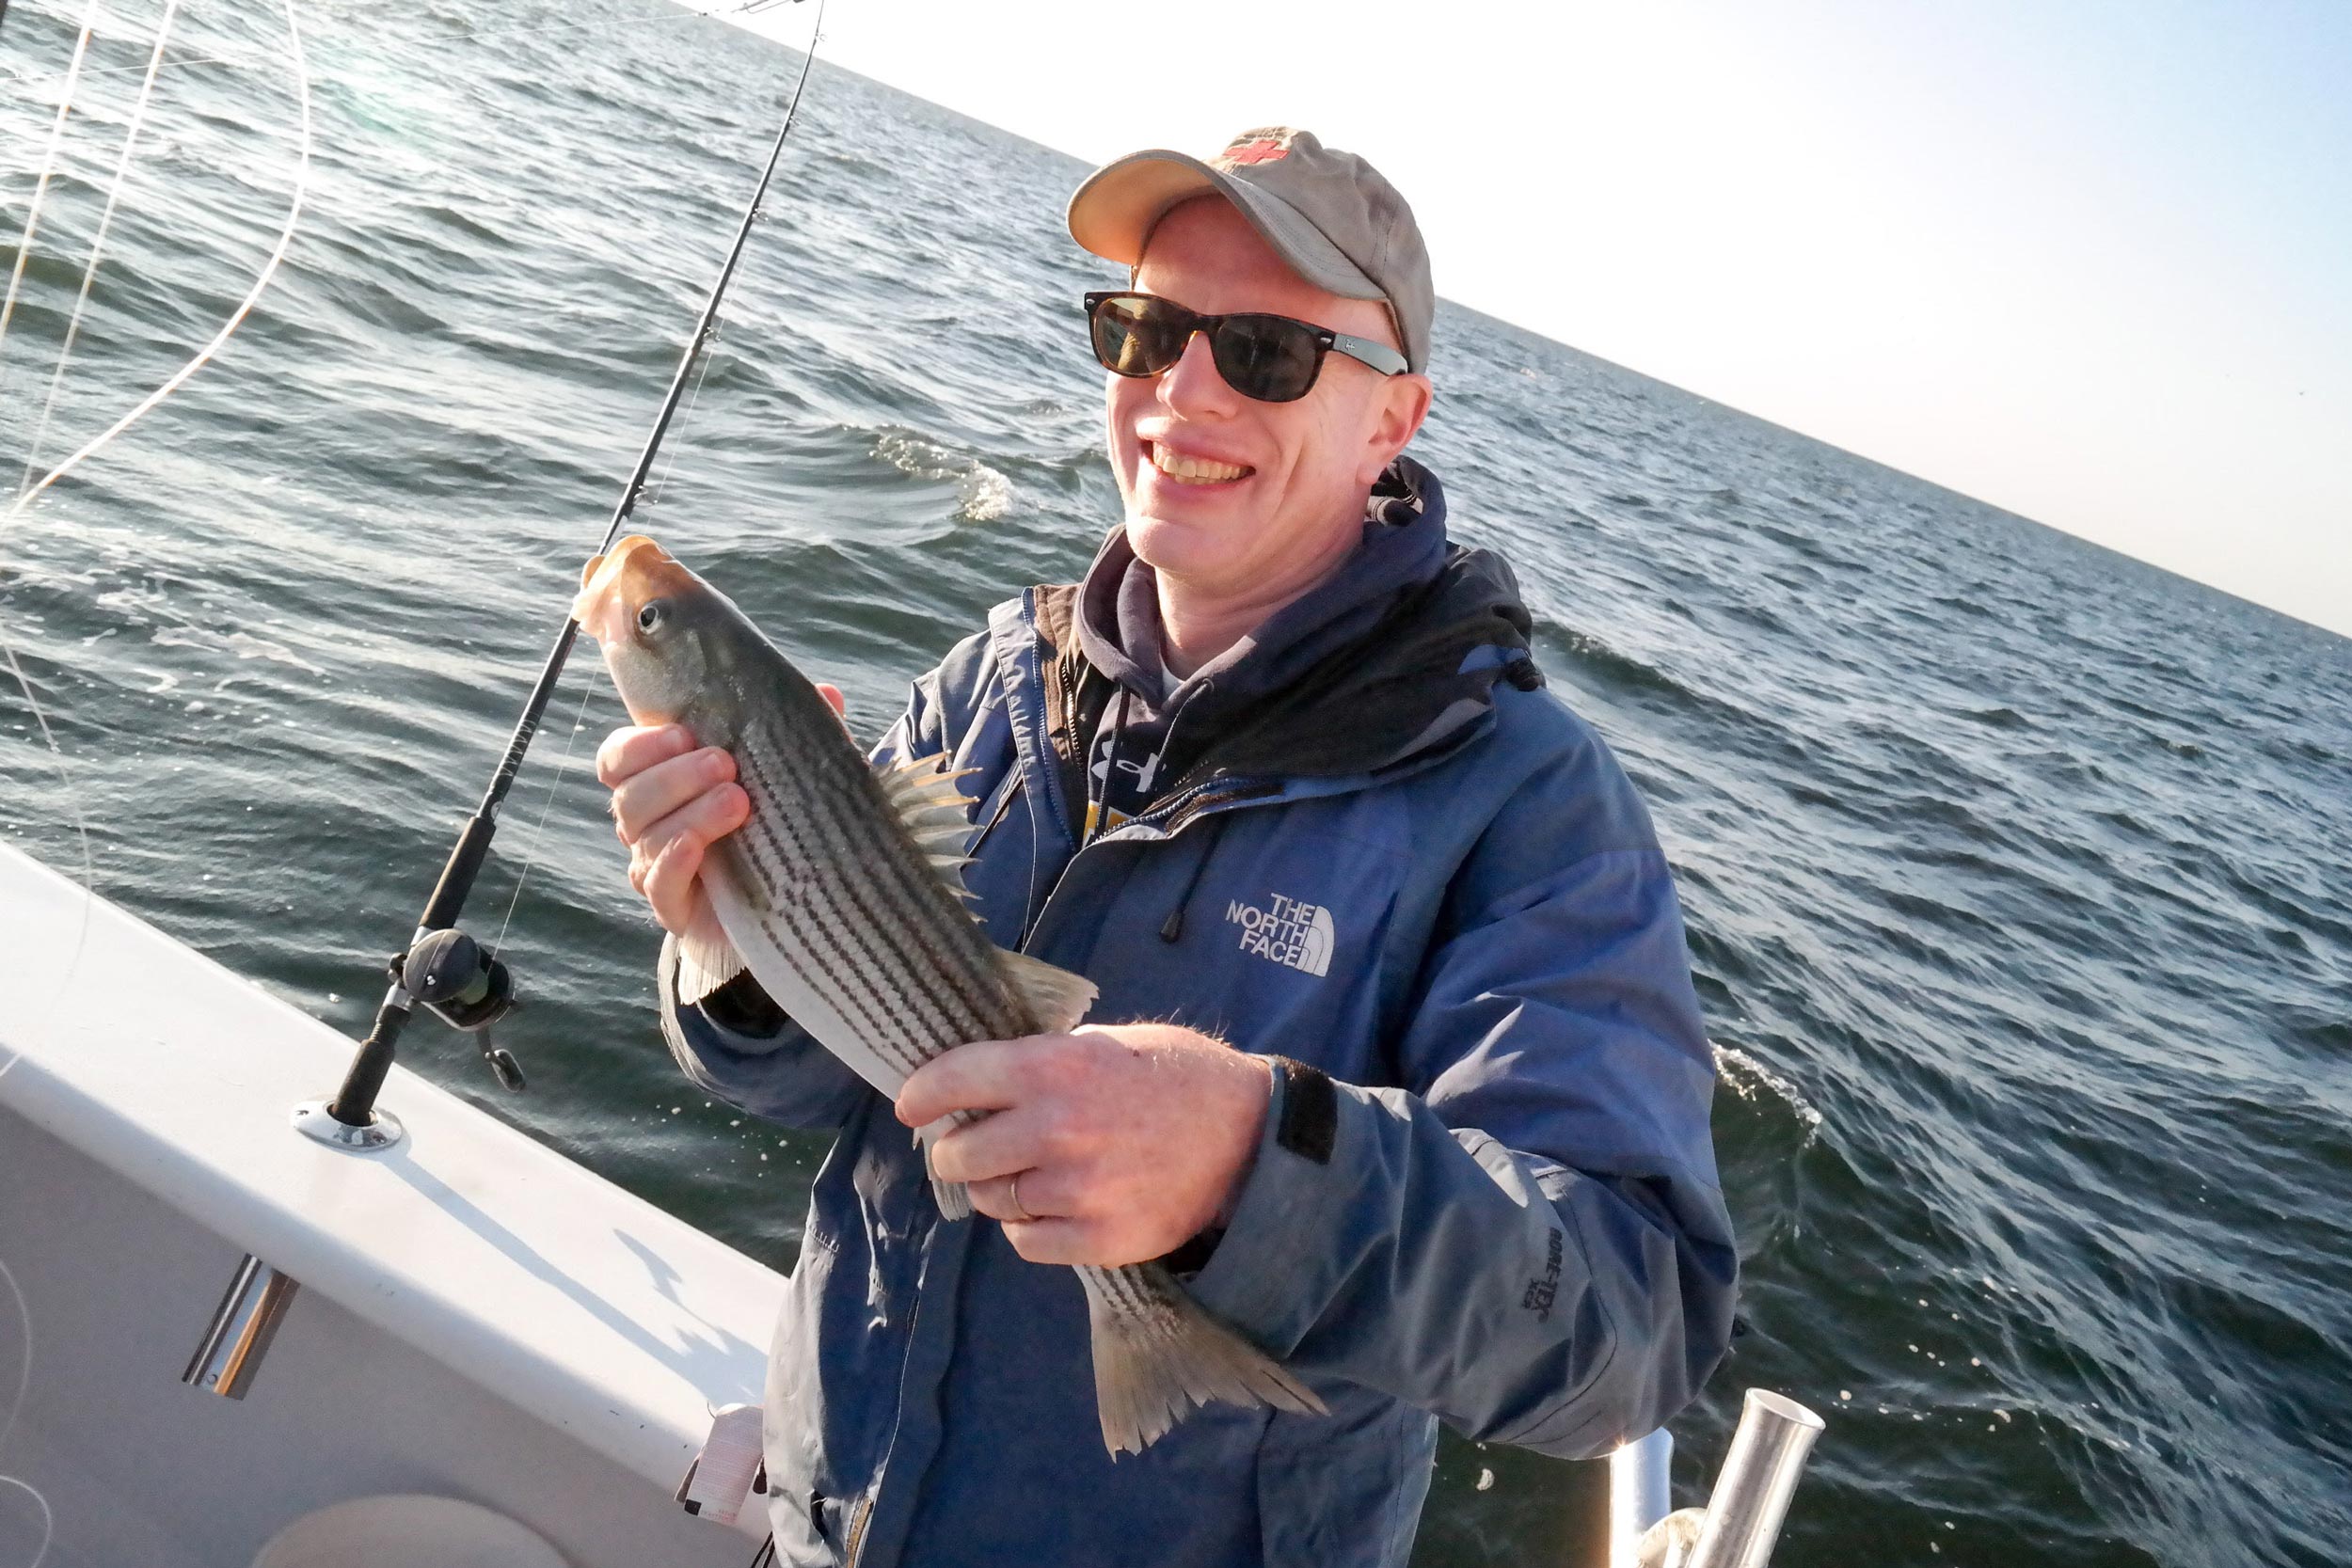 Peter Hedlund, director of Encyclopedia Virginia, took this photo of Mark Saunders in 2015 after he caught a striped bass, or rockfish, on their annual fishing trip in the Chesapeake Bay.